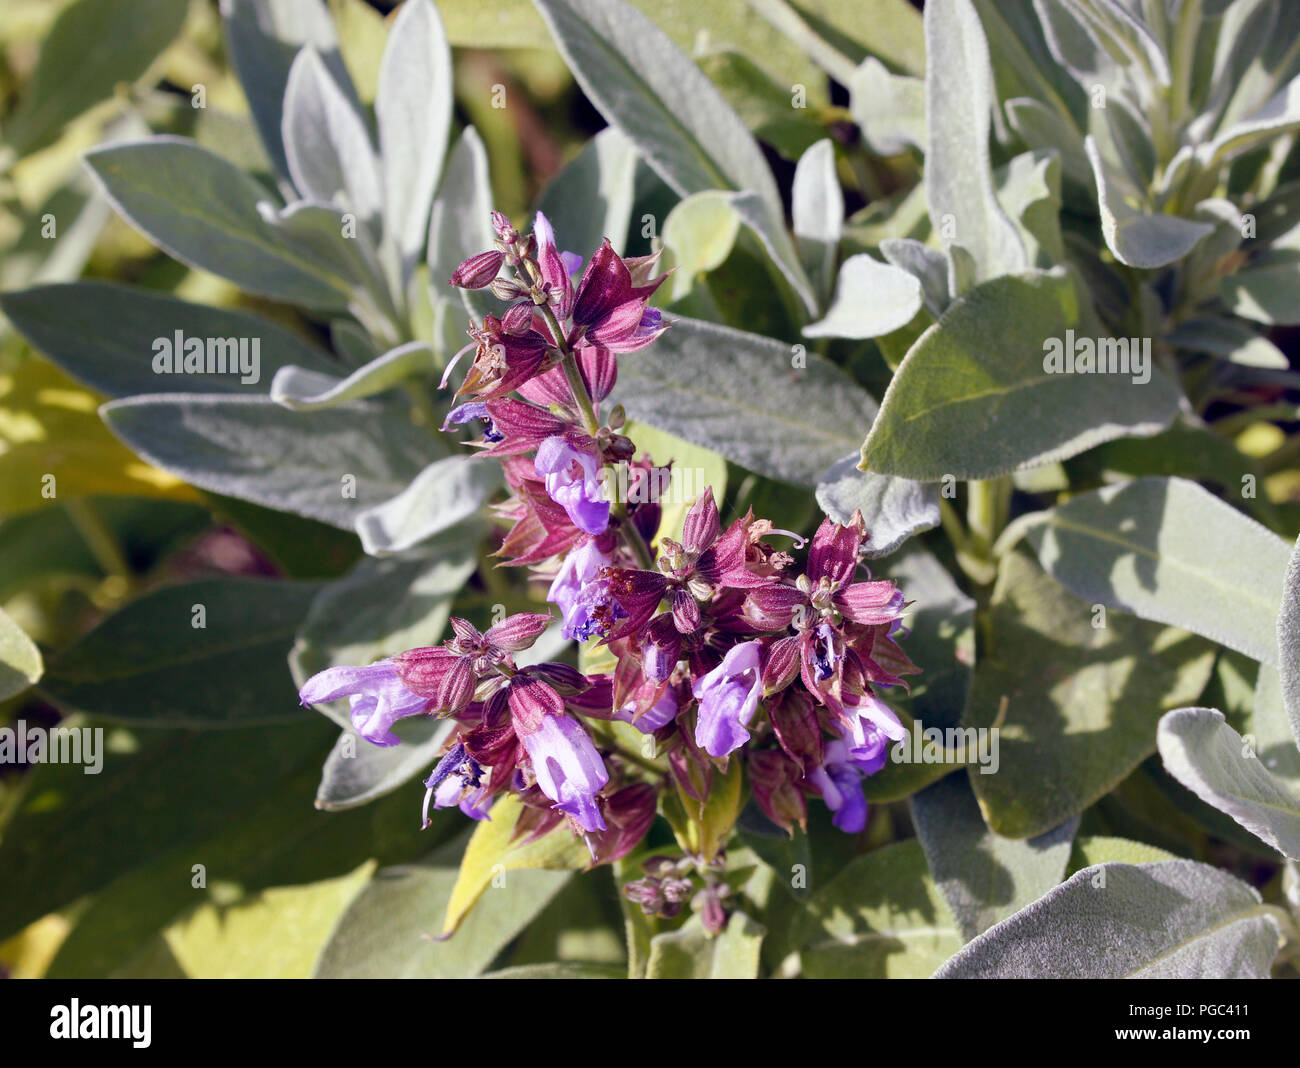 Sage - Salvia officinalis purple flowers against silver grey leaves Stock Photo